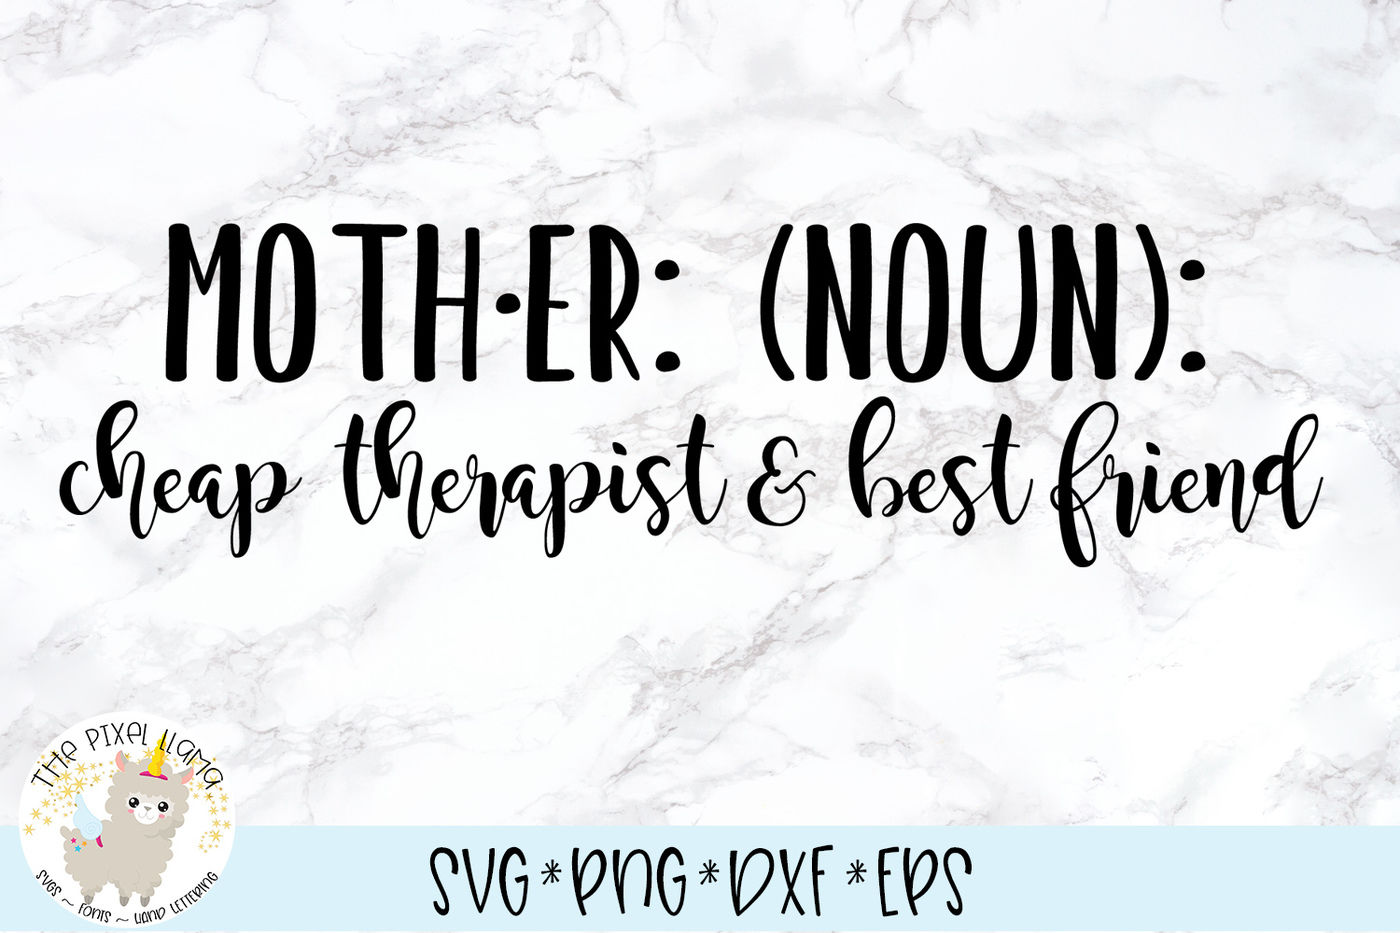 Mother Cheap Therapist Best Friend Svg Cut File By The Pixel Llama Thehungryjpeg Com